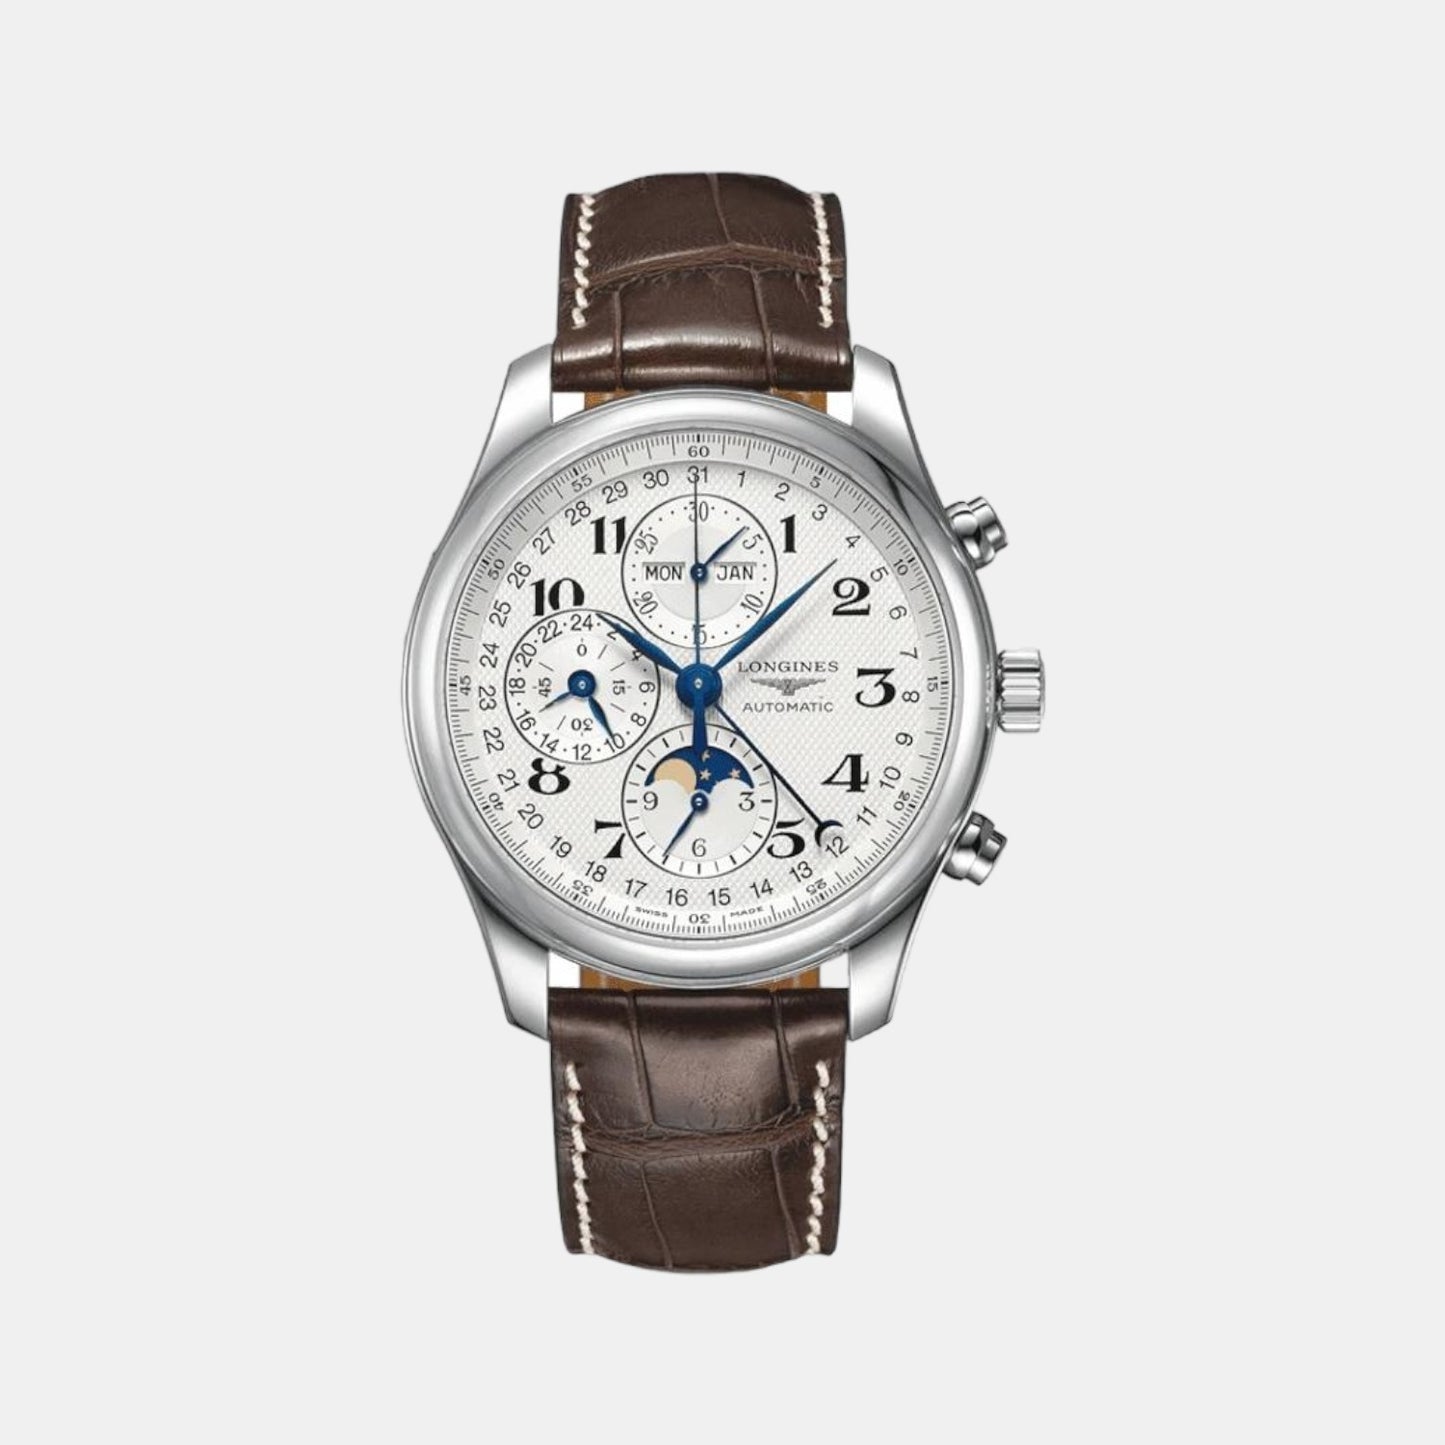 The Longines Master Male Leather Automatic Chronograph Watch L27734783